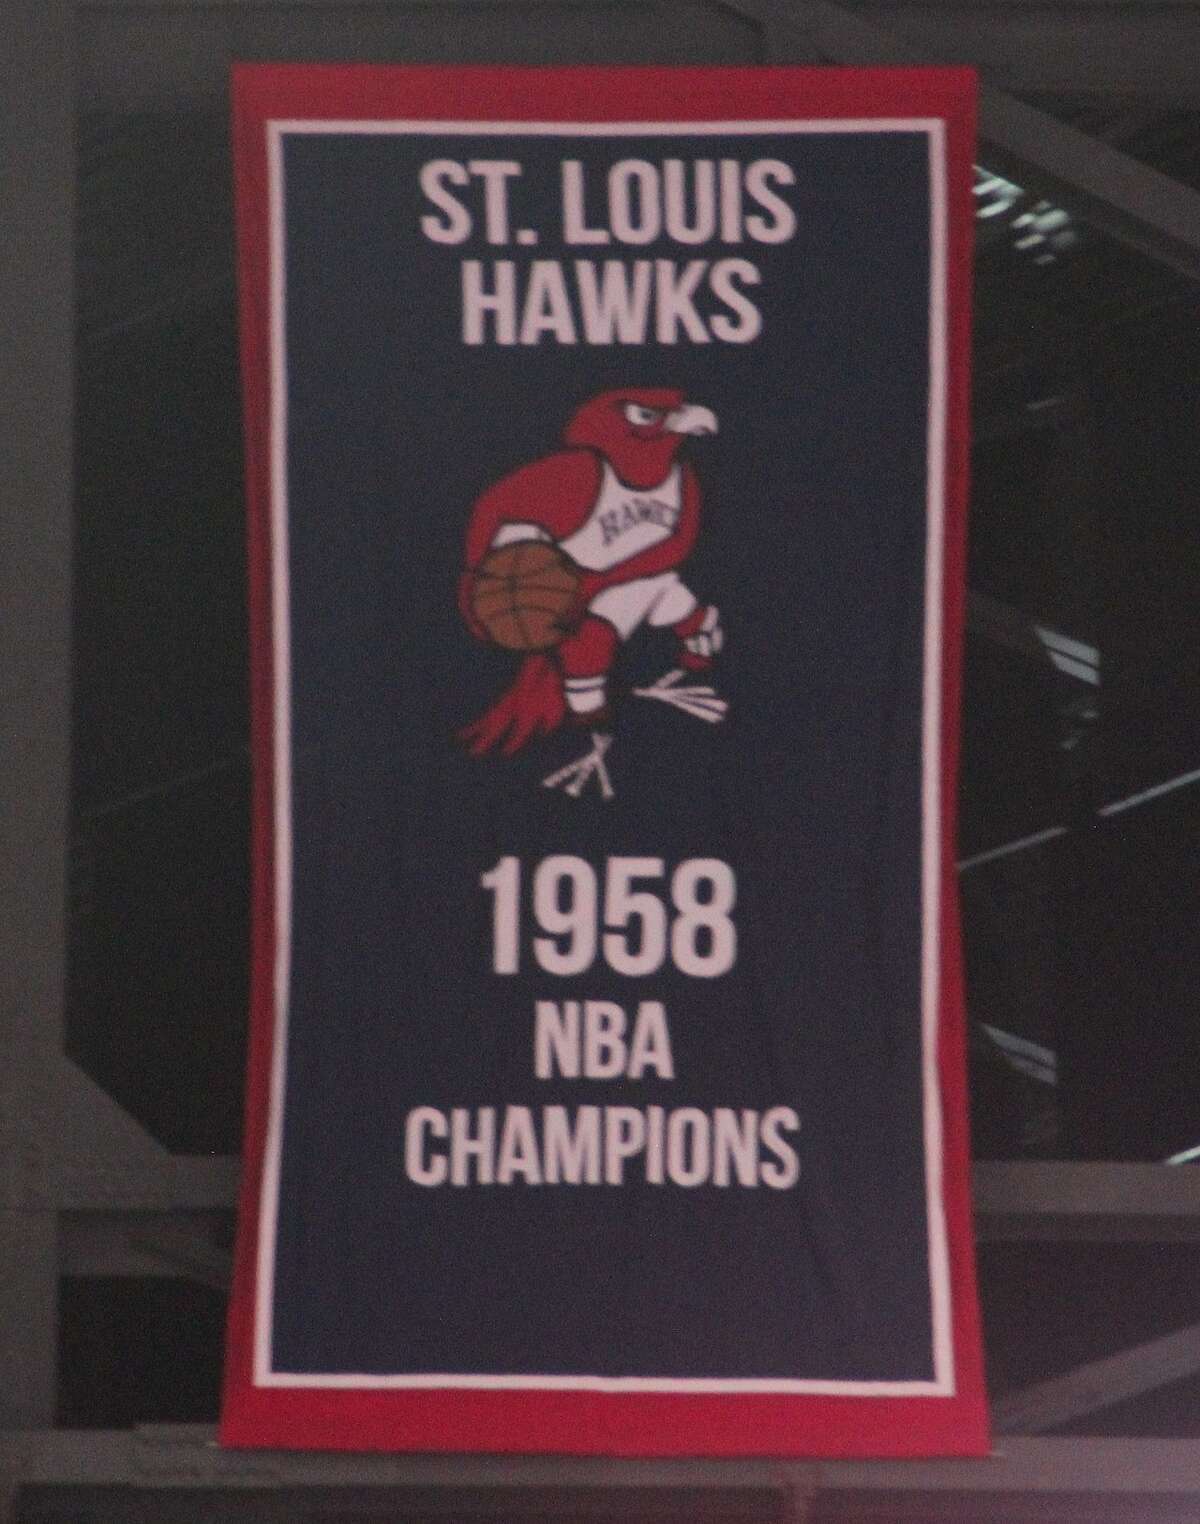 Nba S Atlanta Hawks Can Add To Their Lone St Louis Title Commentary